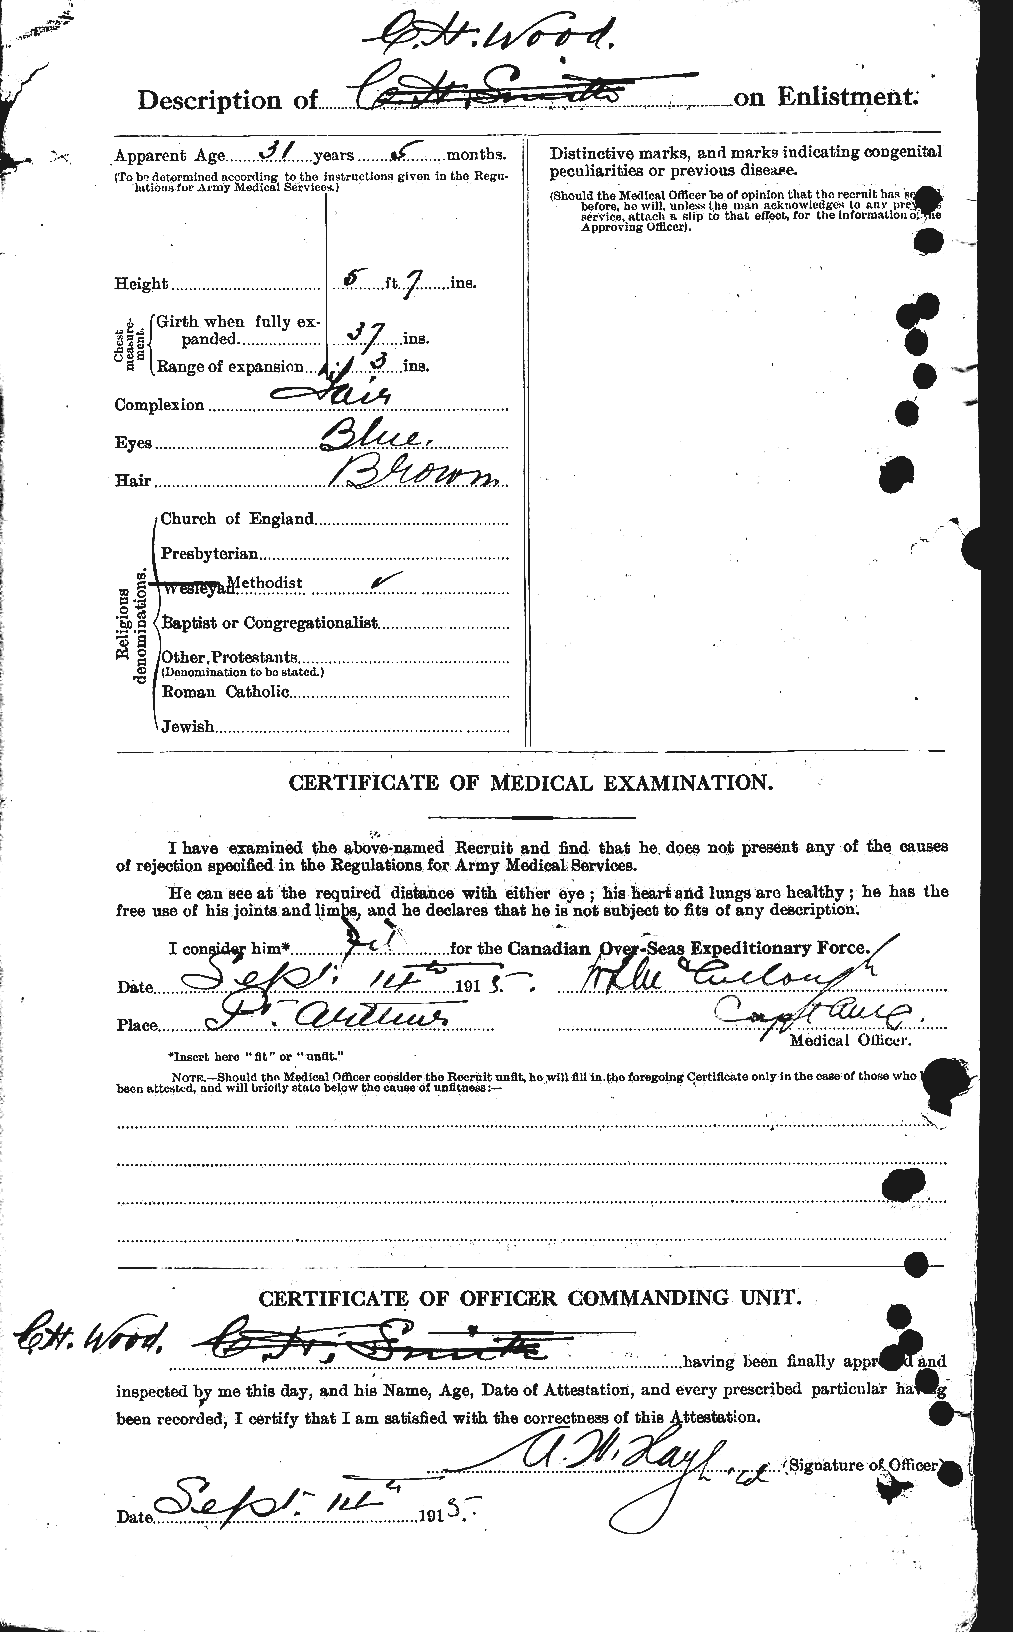 Personnel Records of the First World War - CEF 682896b